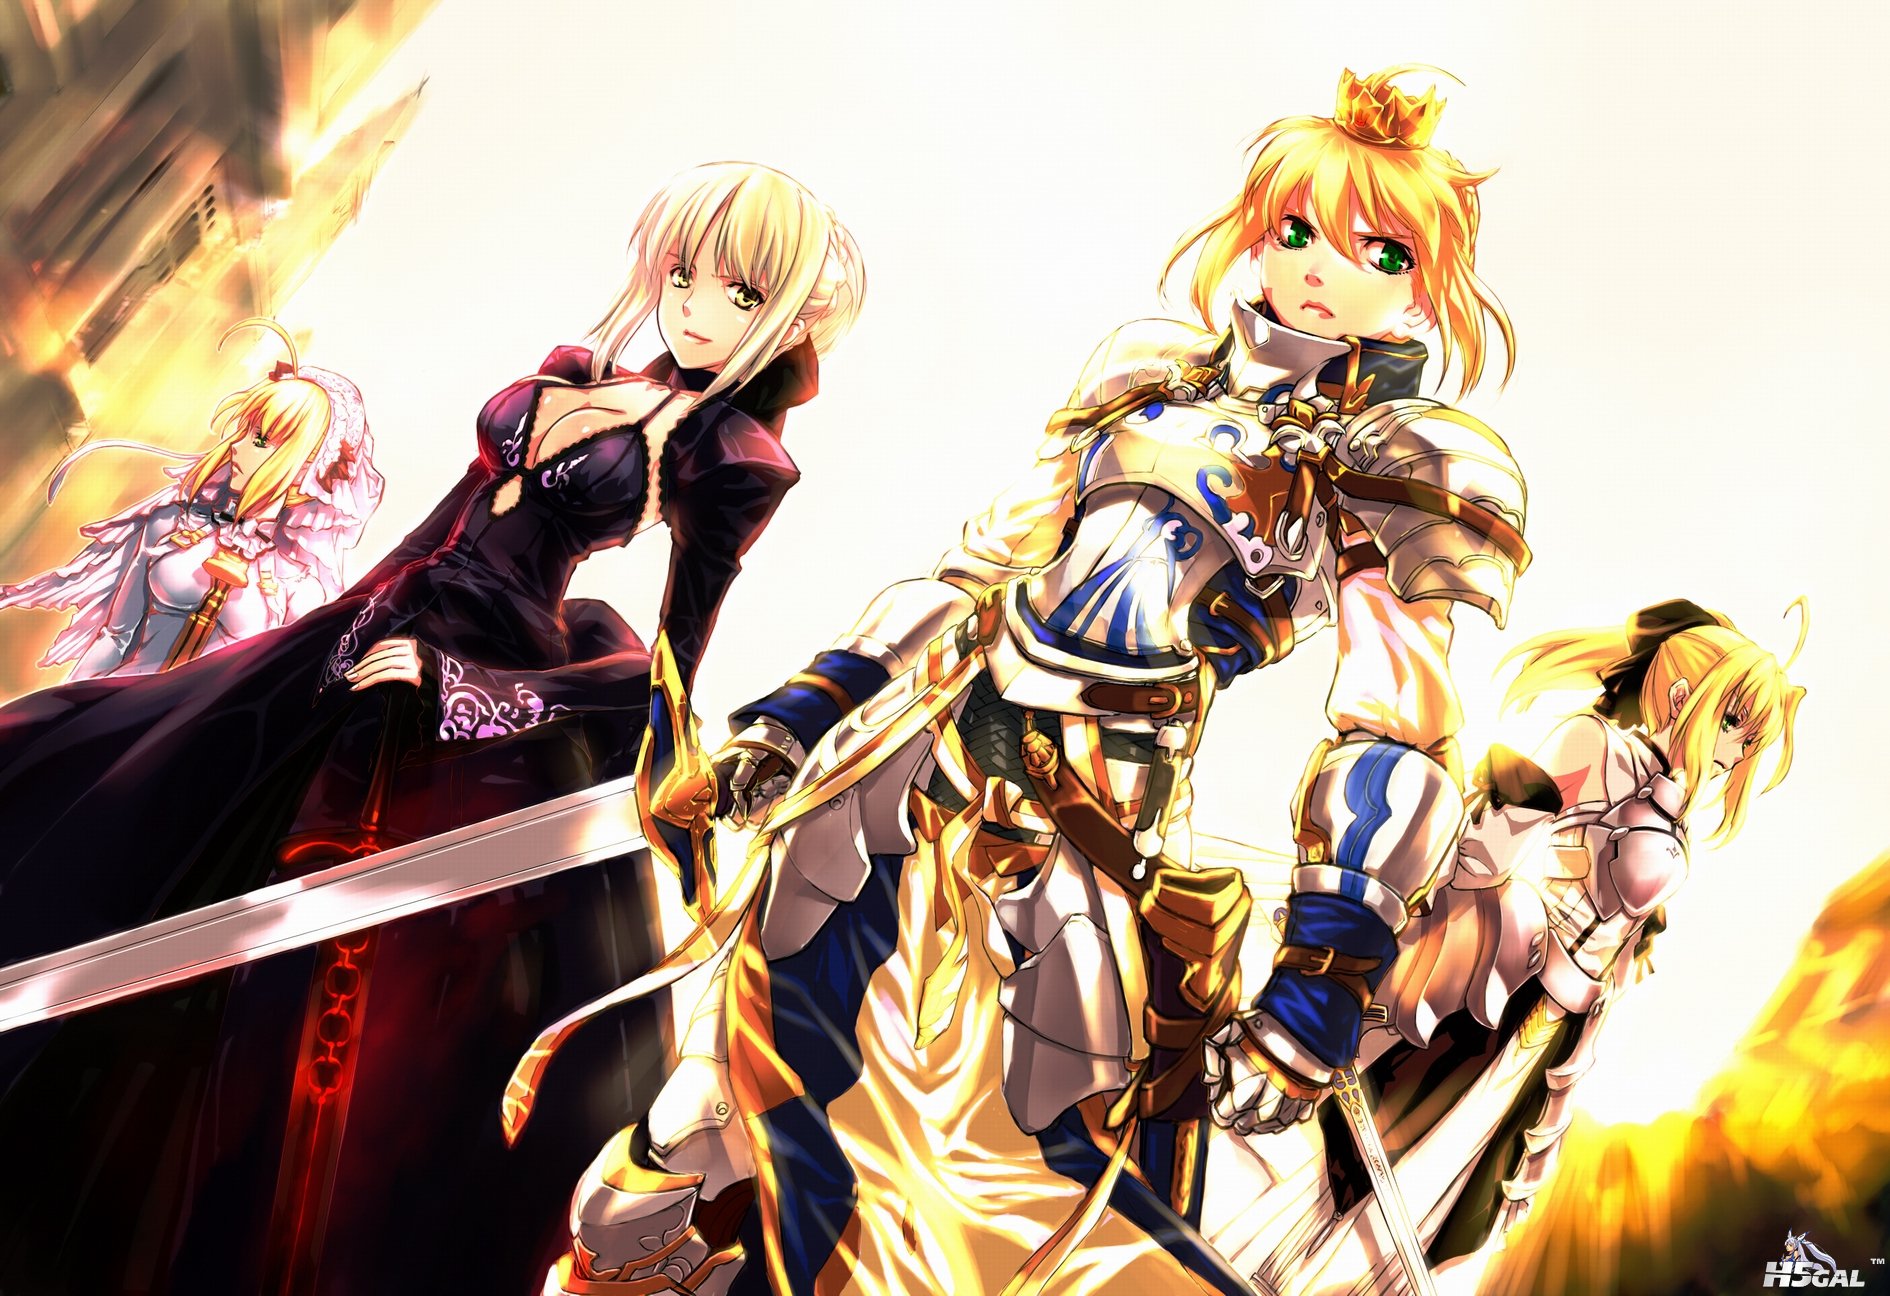 ANIME-PICTURES.NET_-_183715-1890x1296-fateextra-fateunlimited codes-fatestay nig.jpg